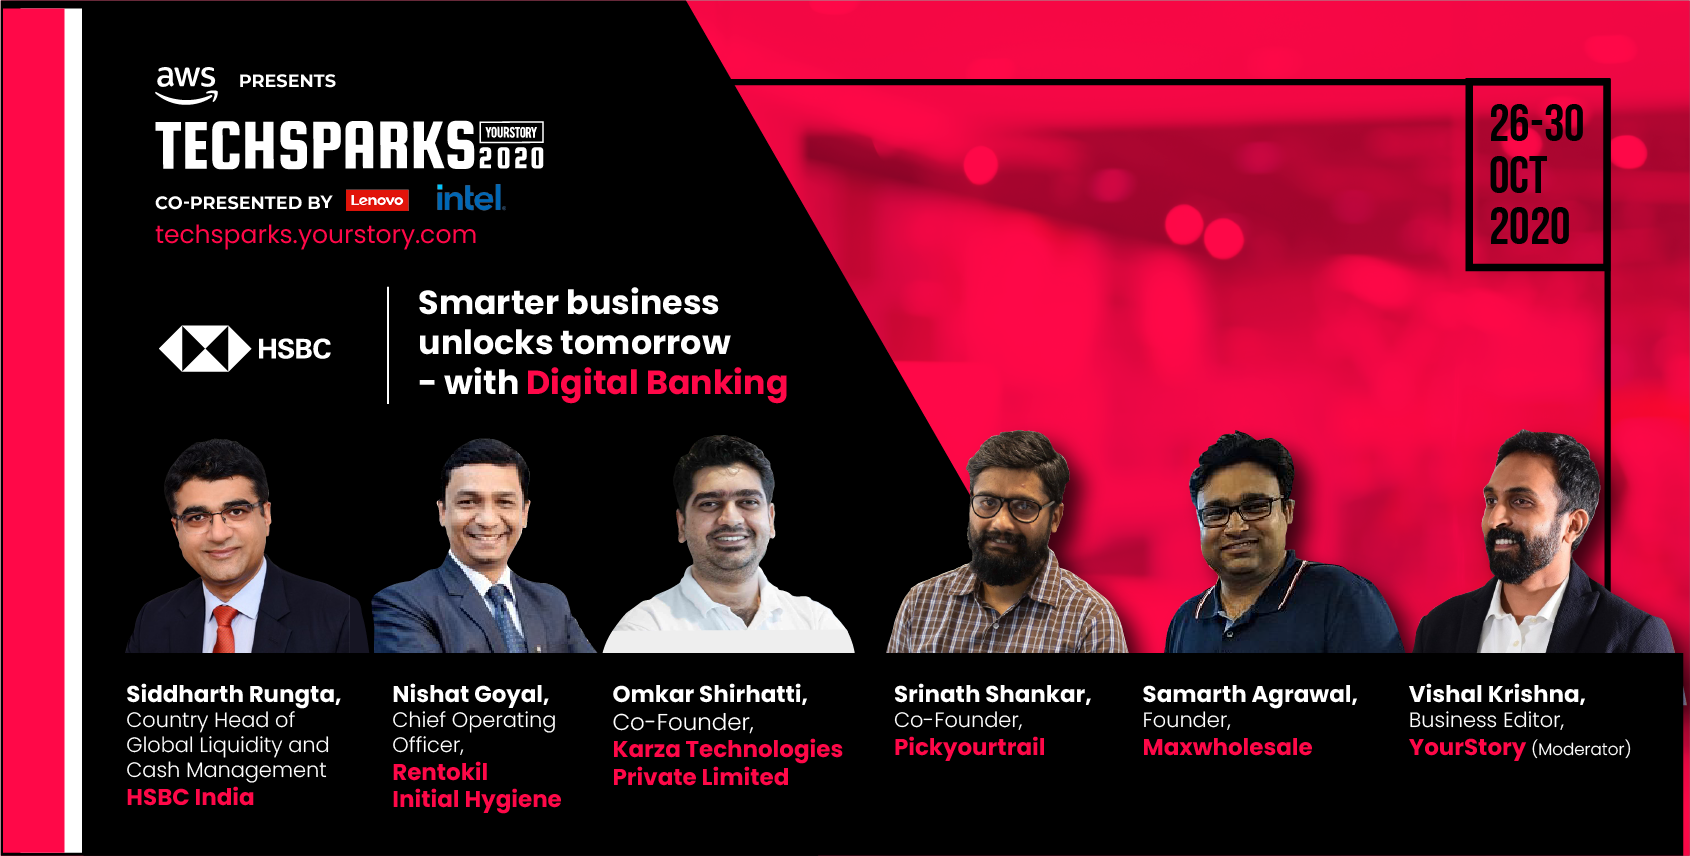 [TechSparks 2020] Experts discuss how a global bank is partnering with startups to enable digital banking